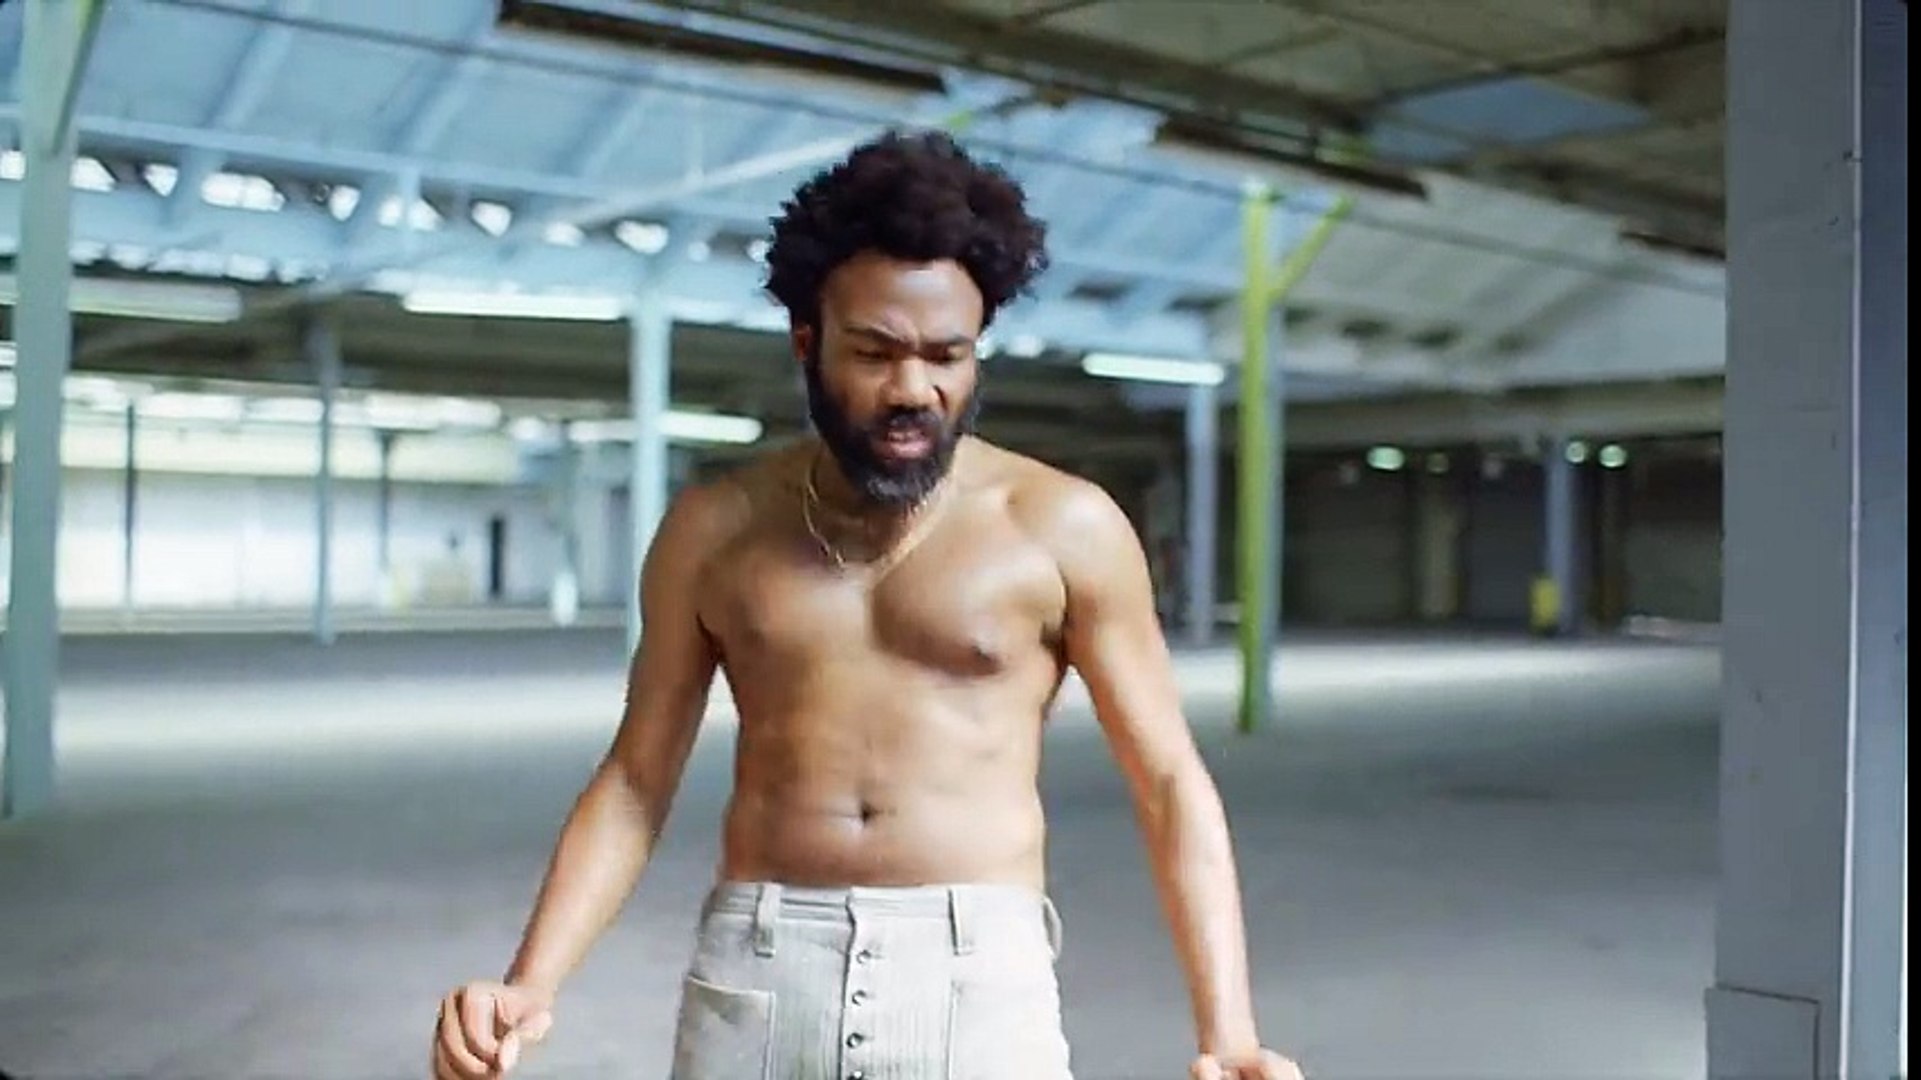 Childish Gambino - This Is America (Official Video) - video Dailymotion